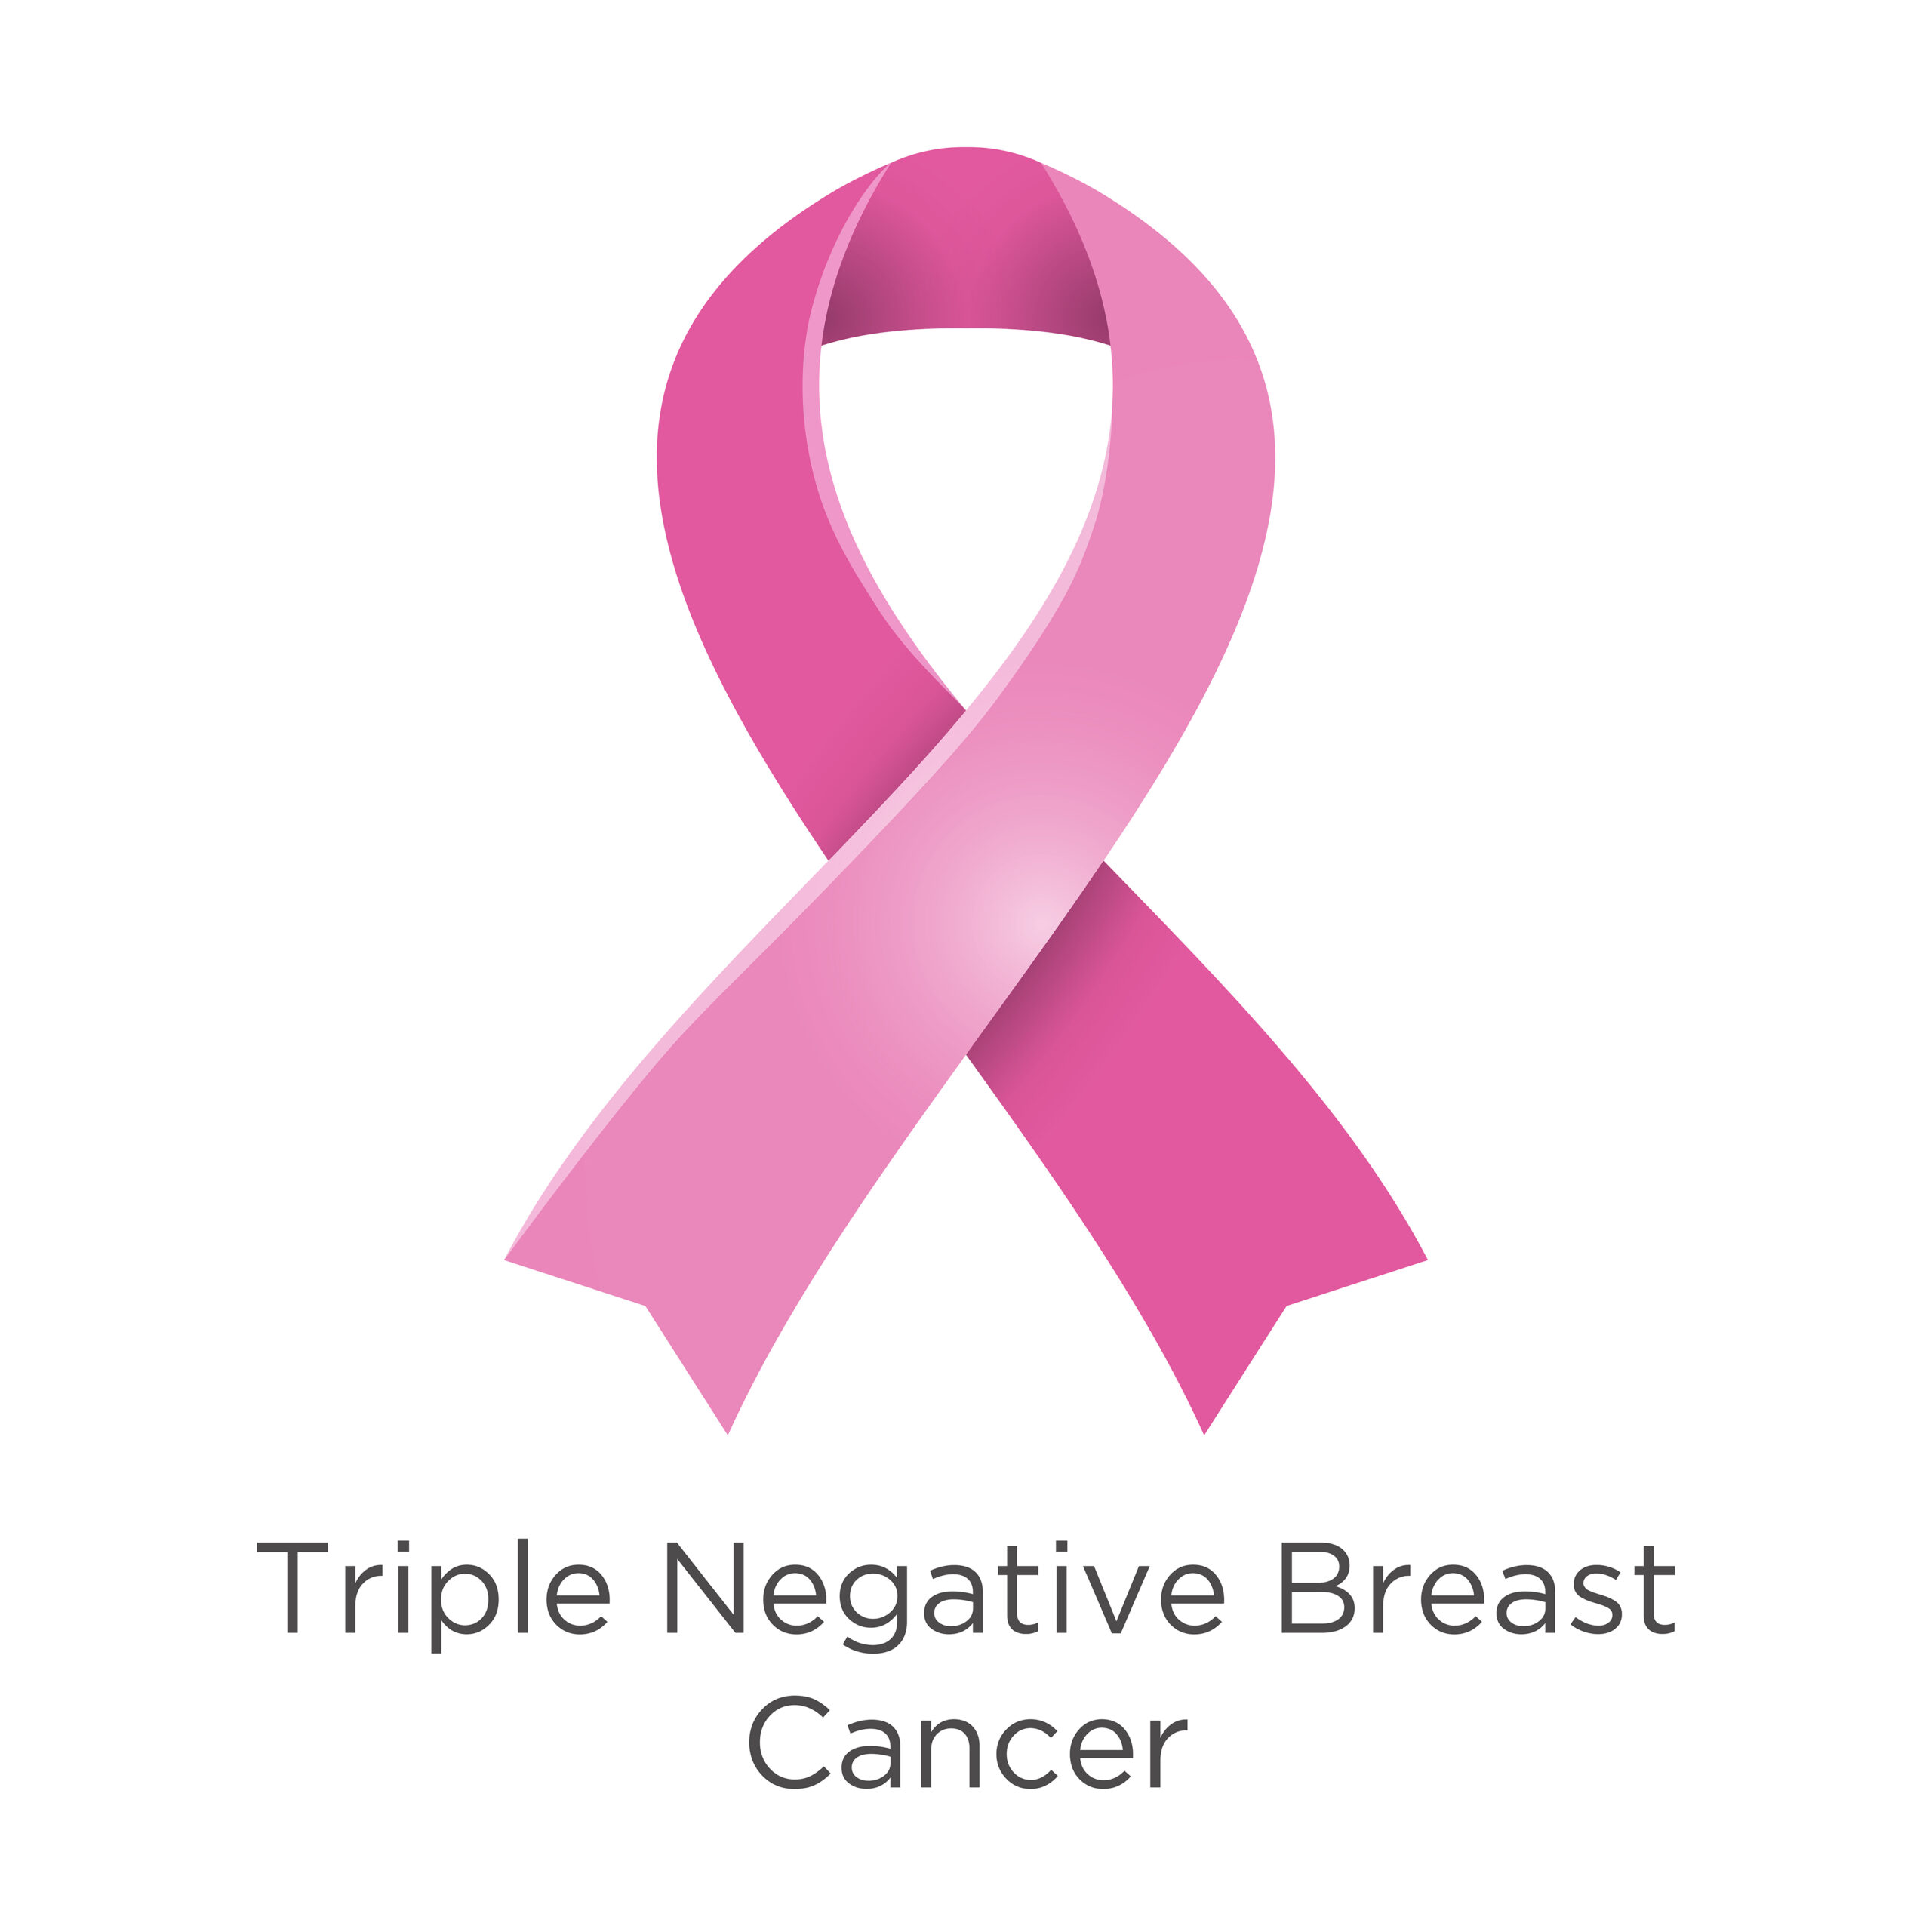 how to treat triple negative breast cancer, a type of breast cancer